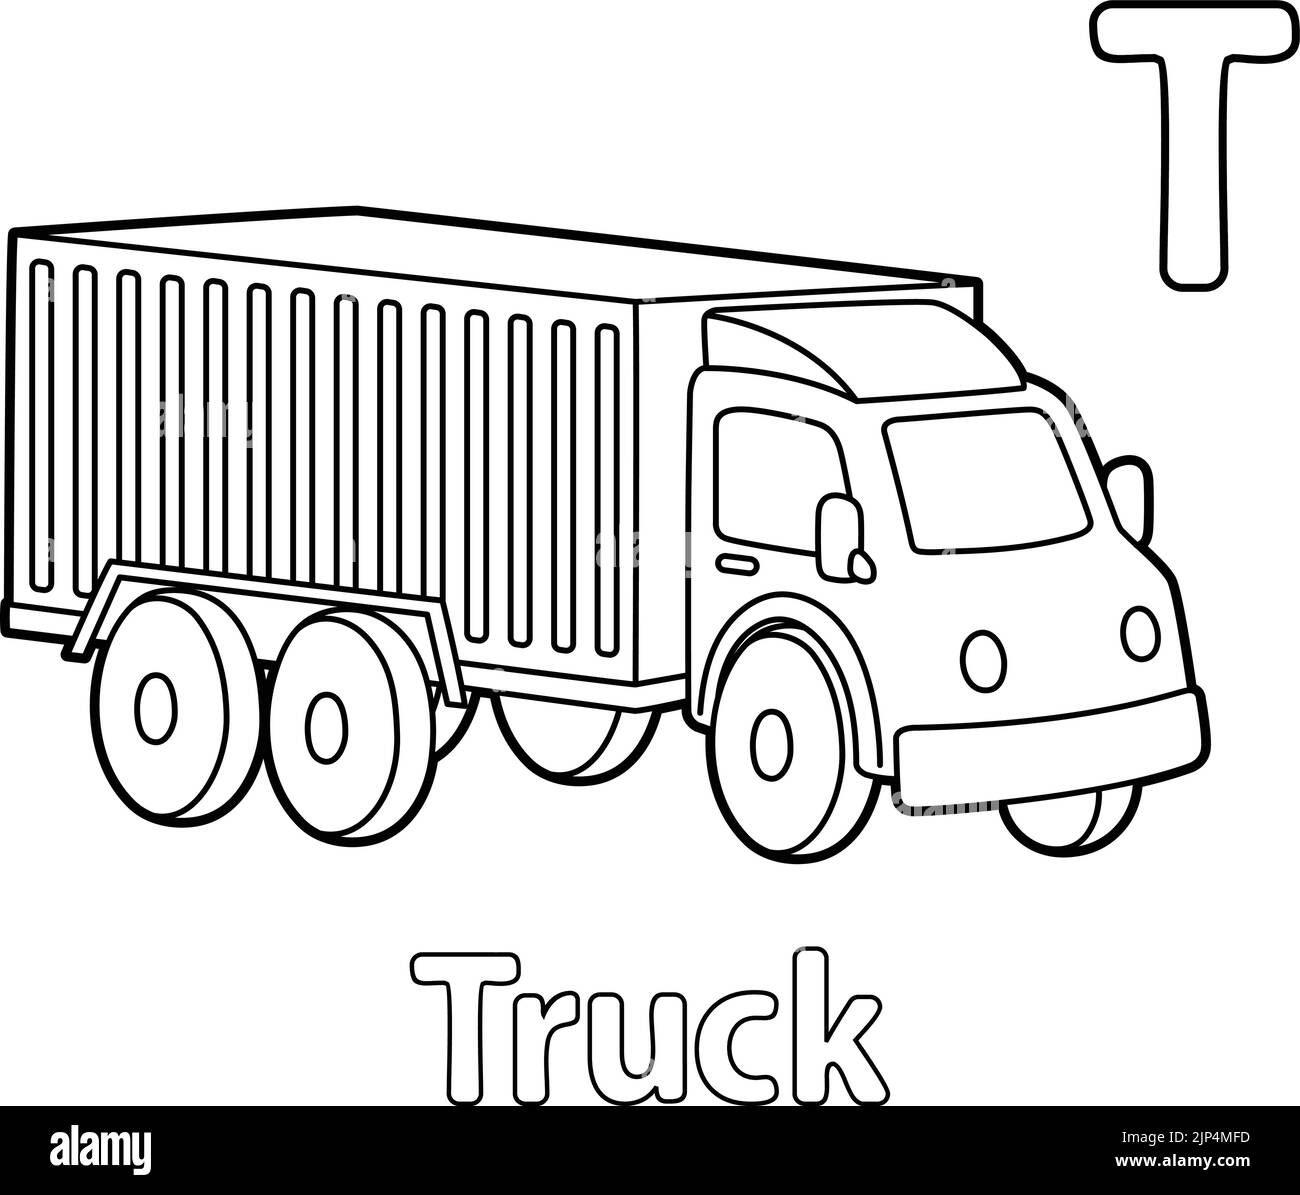 Truck Alphabet ABC Coloring Page T Stock Vector